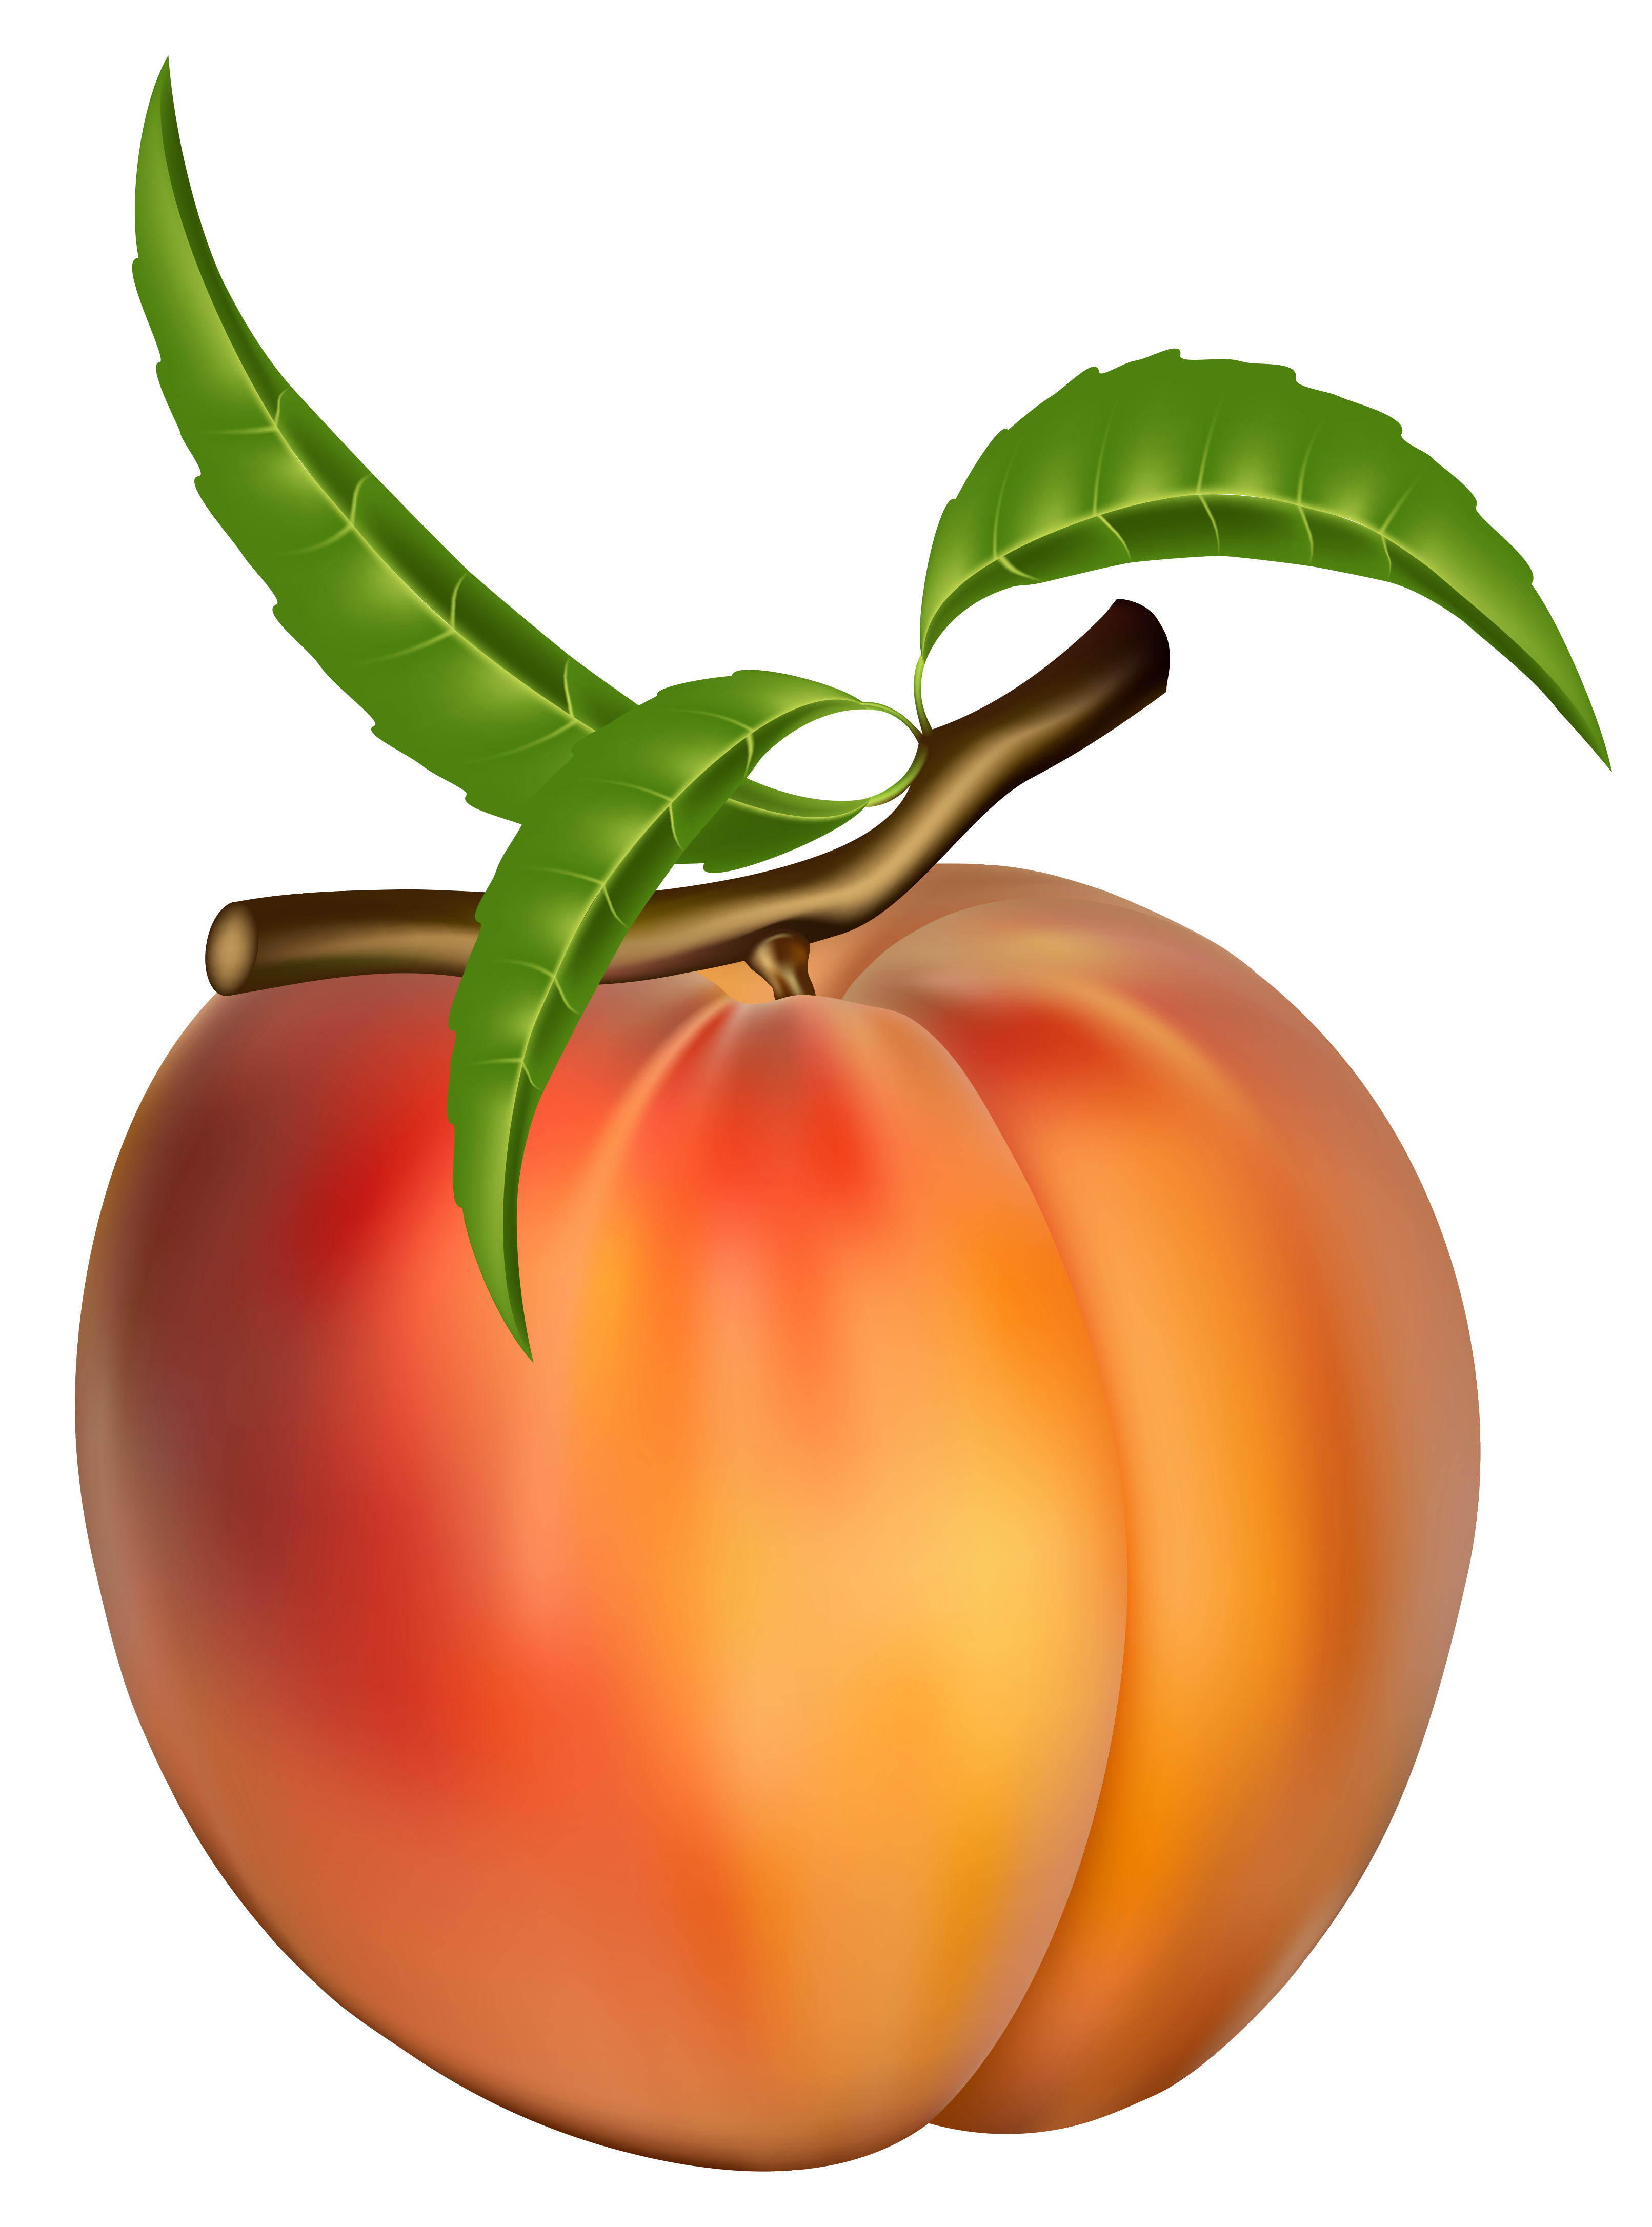 Peach free z lds. Learning clipart everyday life